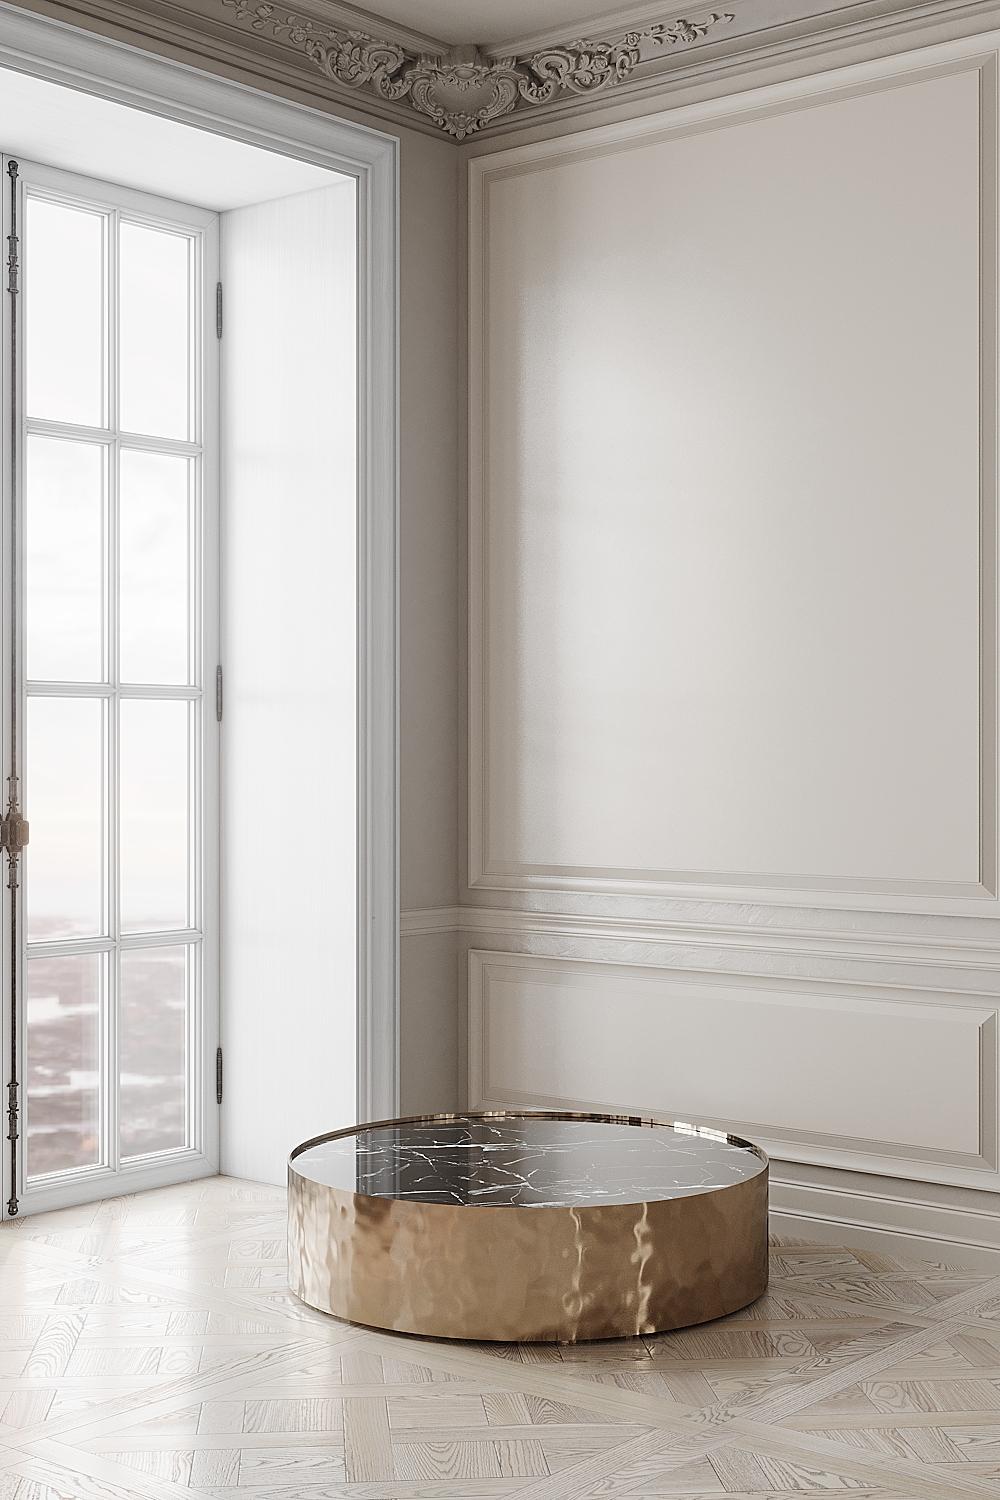 The Afterglow coffee table is designed by Emél & Browne in the minimalist and contemporary style and custom made in Italy by skilled artisans. The Circular Nero Marquina marble top evokes the certainty of the coming night, and acts as a back-drop